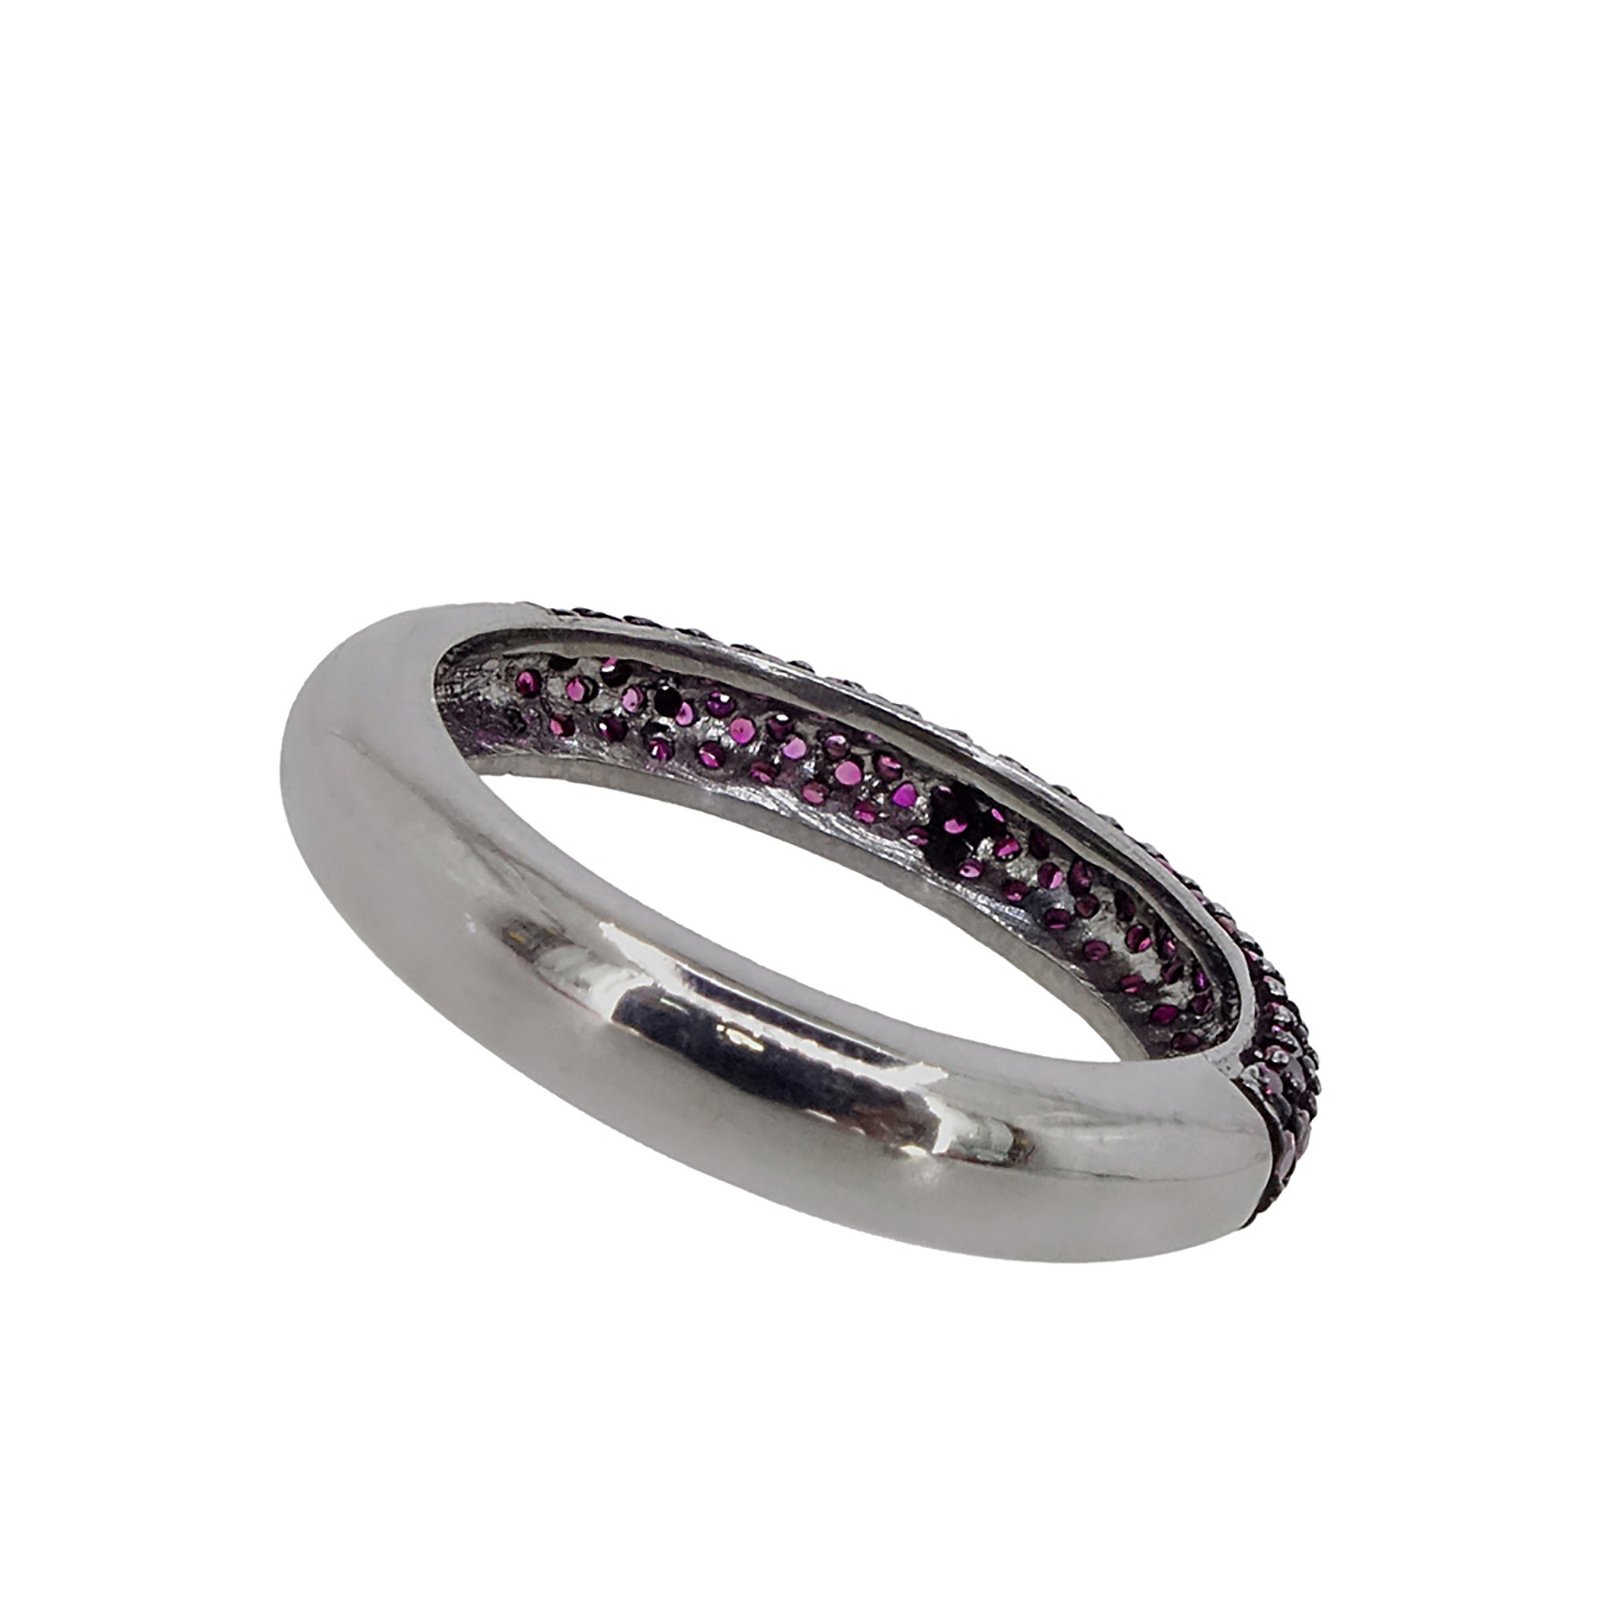 Real pave ruby gemstone full eternity band ring, 925 sterling silver jewelry